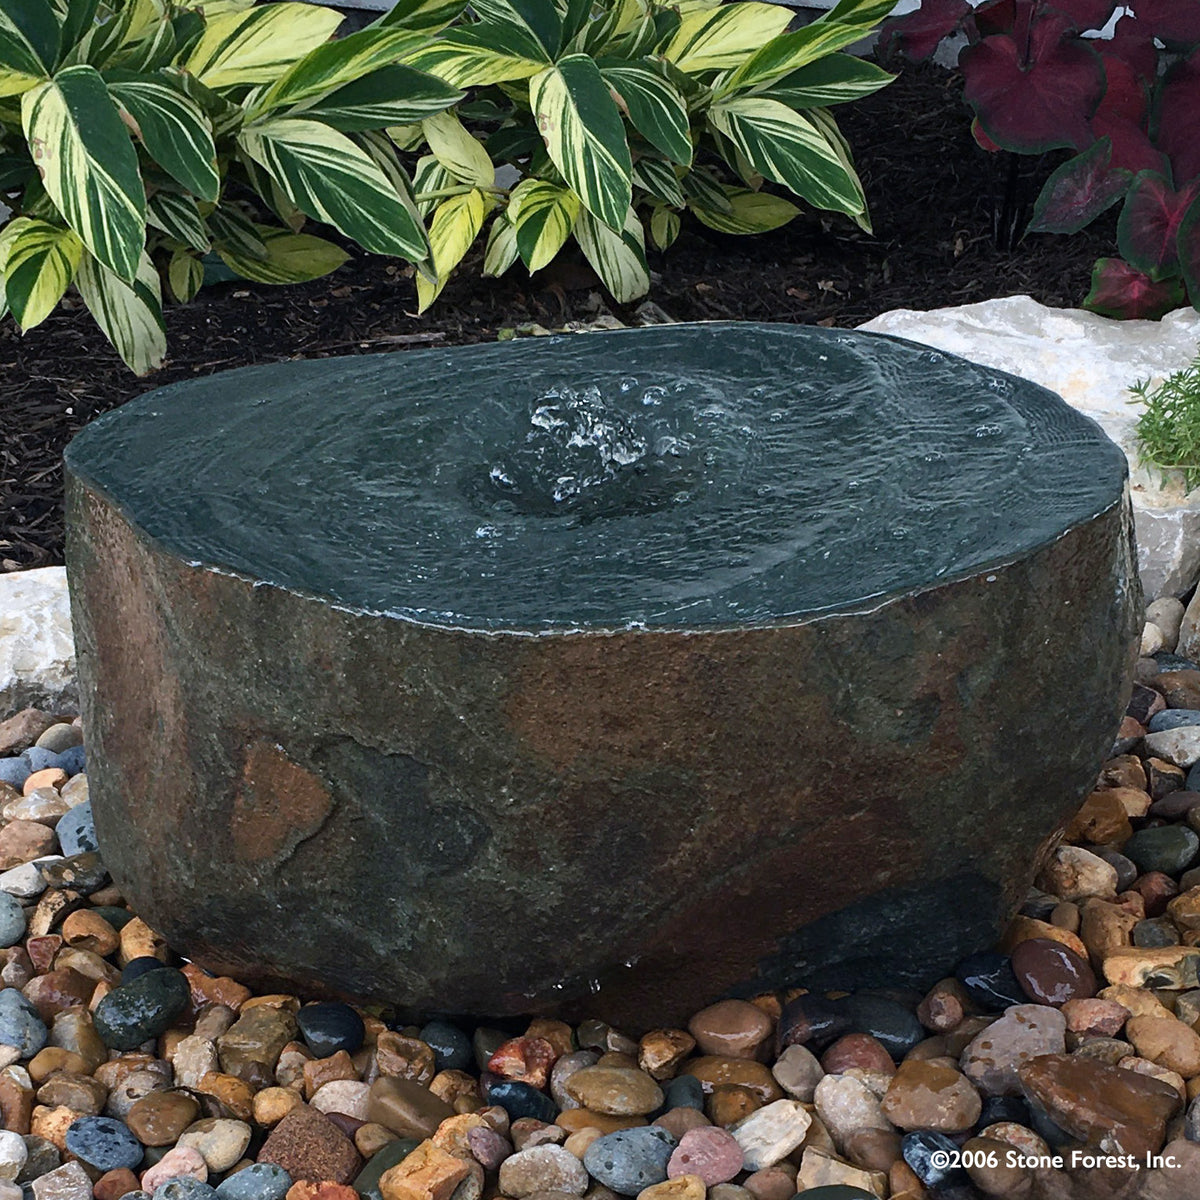 Stone Forest Hand Carved Edo garden fountain made from a granite boulder image 4 of 5